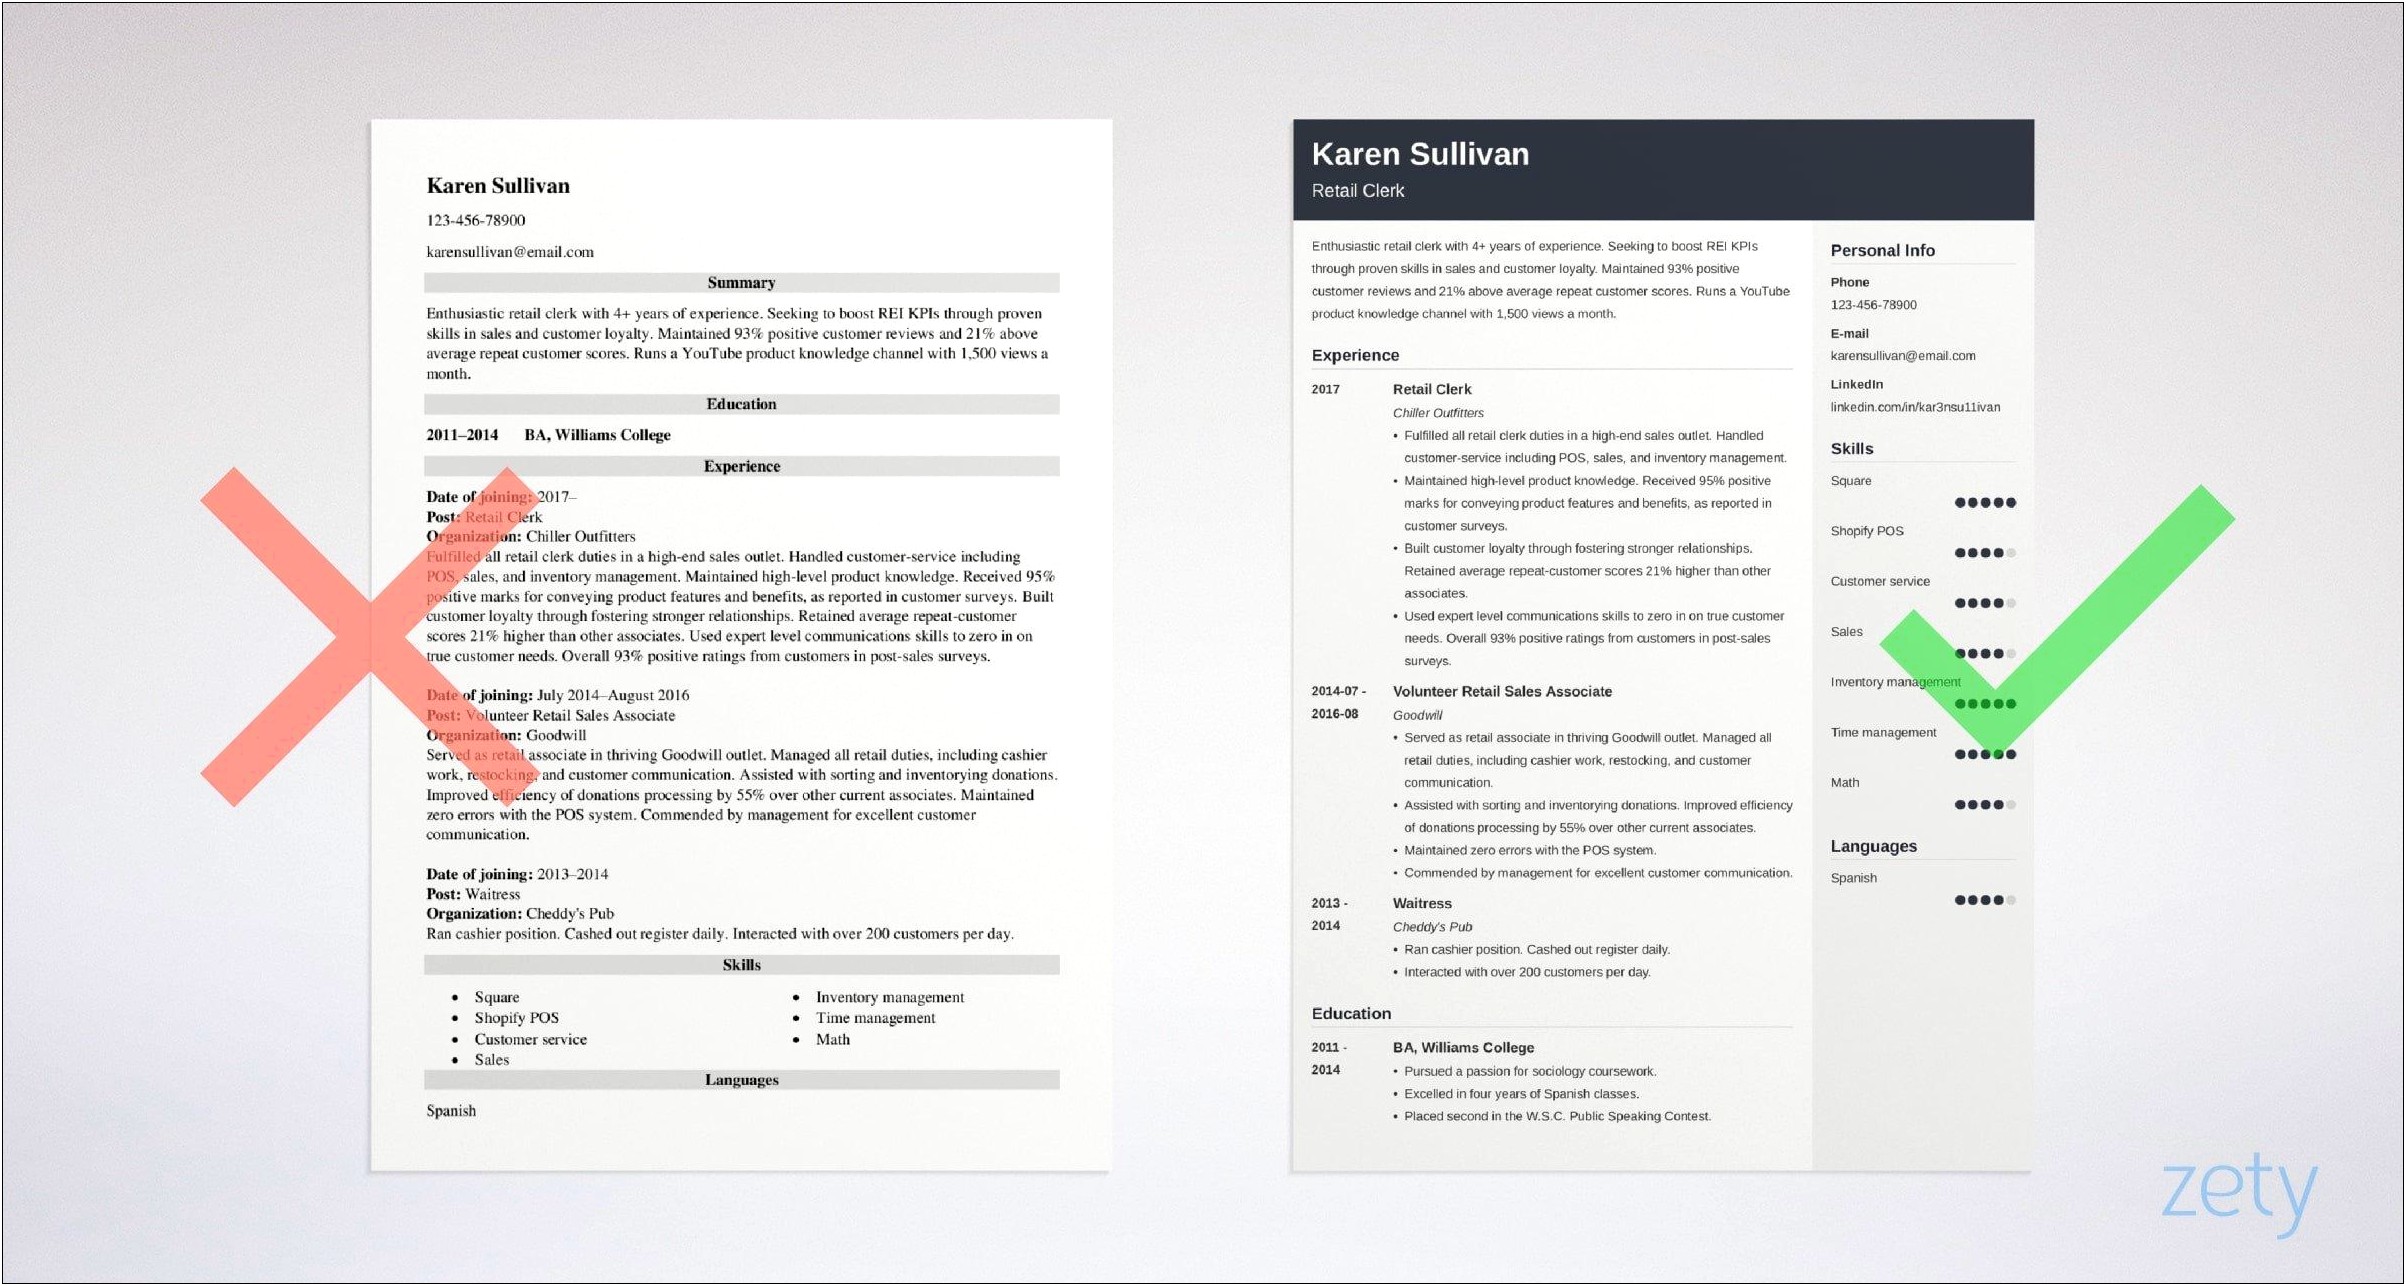 Tips For A Good Resume For Retail